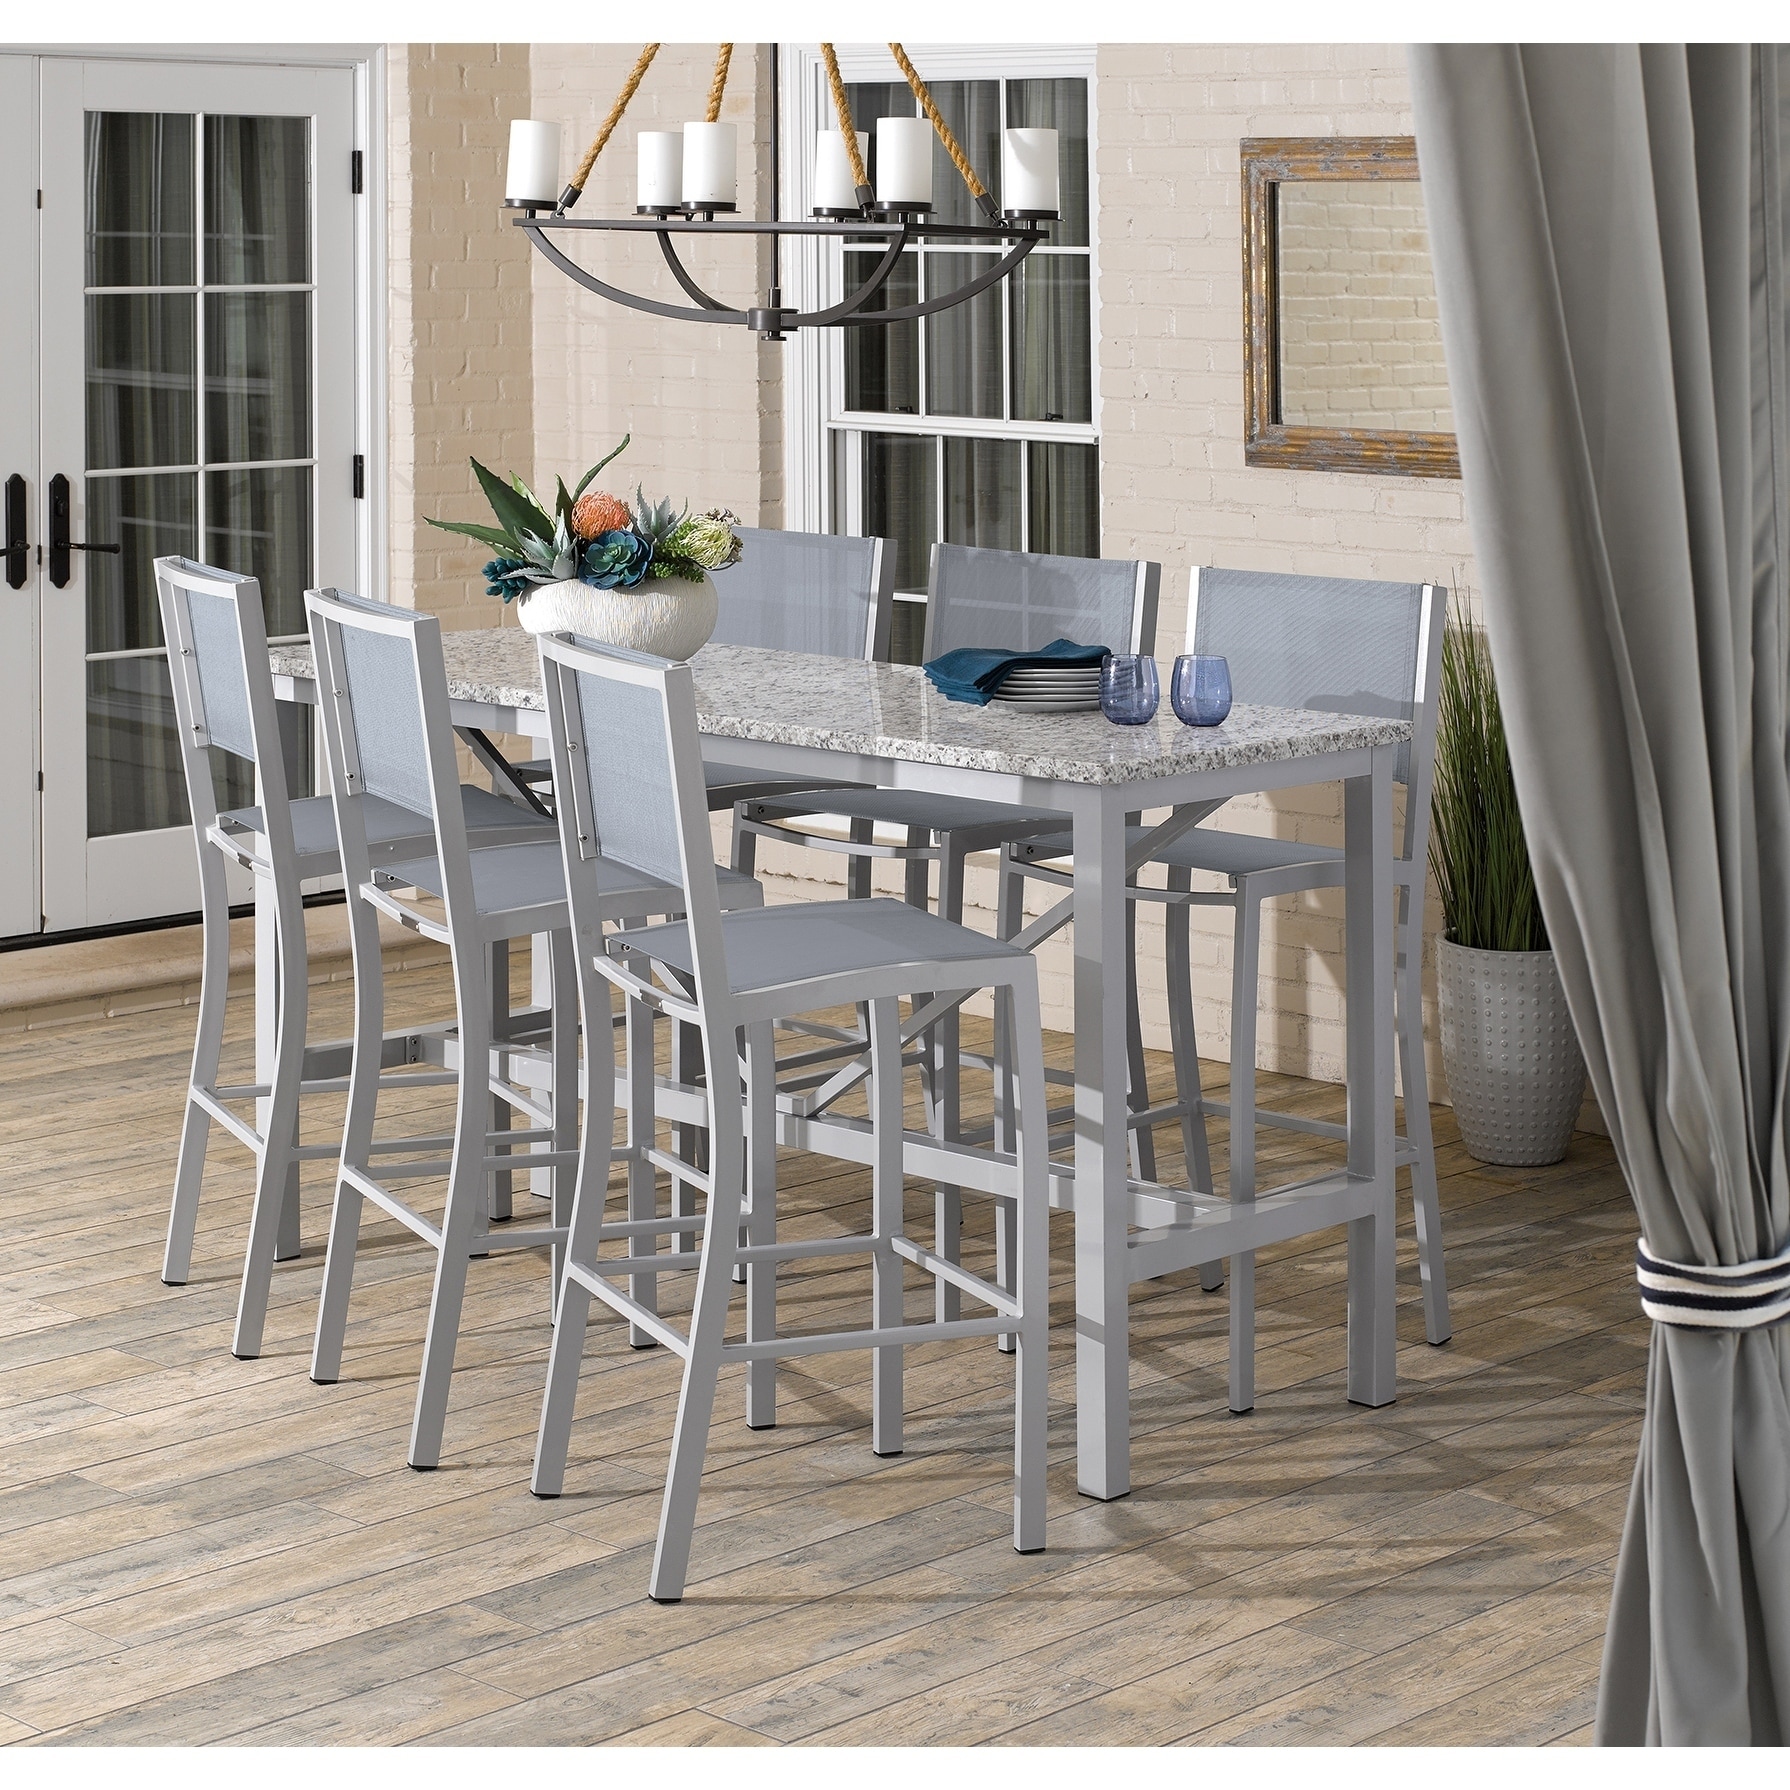 Oxford Garden Travira 7 piece 72 in x 30 in Lite Core Ash Bar Table & Sling Bar Chair Set Slate Sling